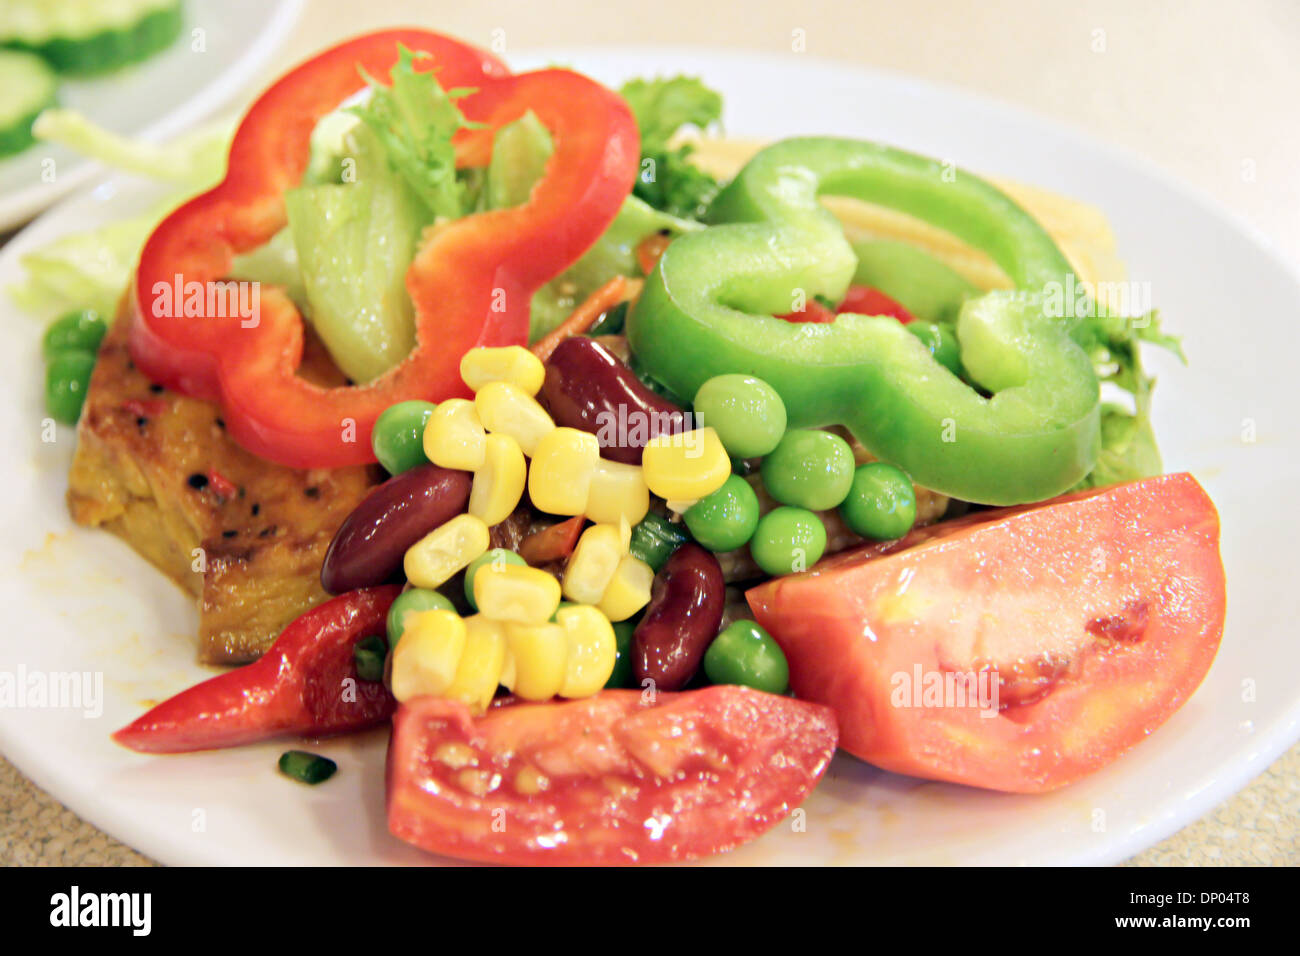 Salad containing vegetables of various kinds Mixed. Stock Photo